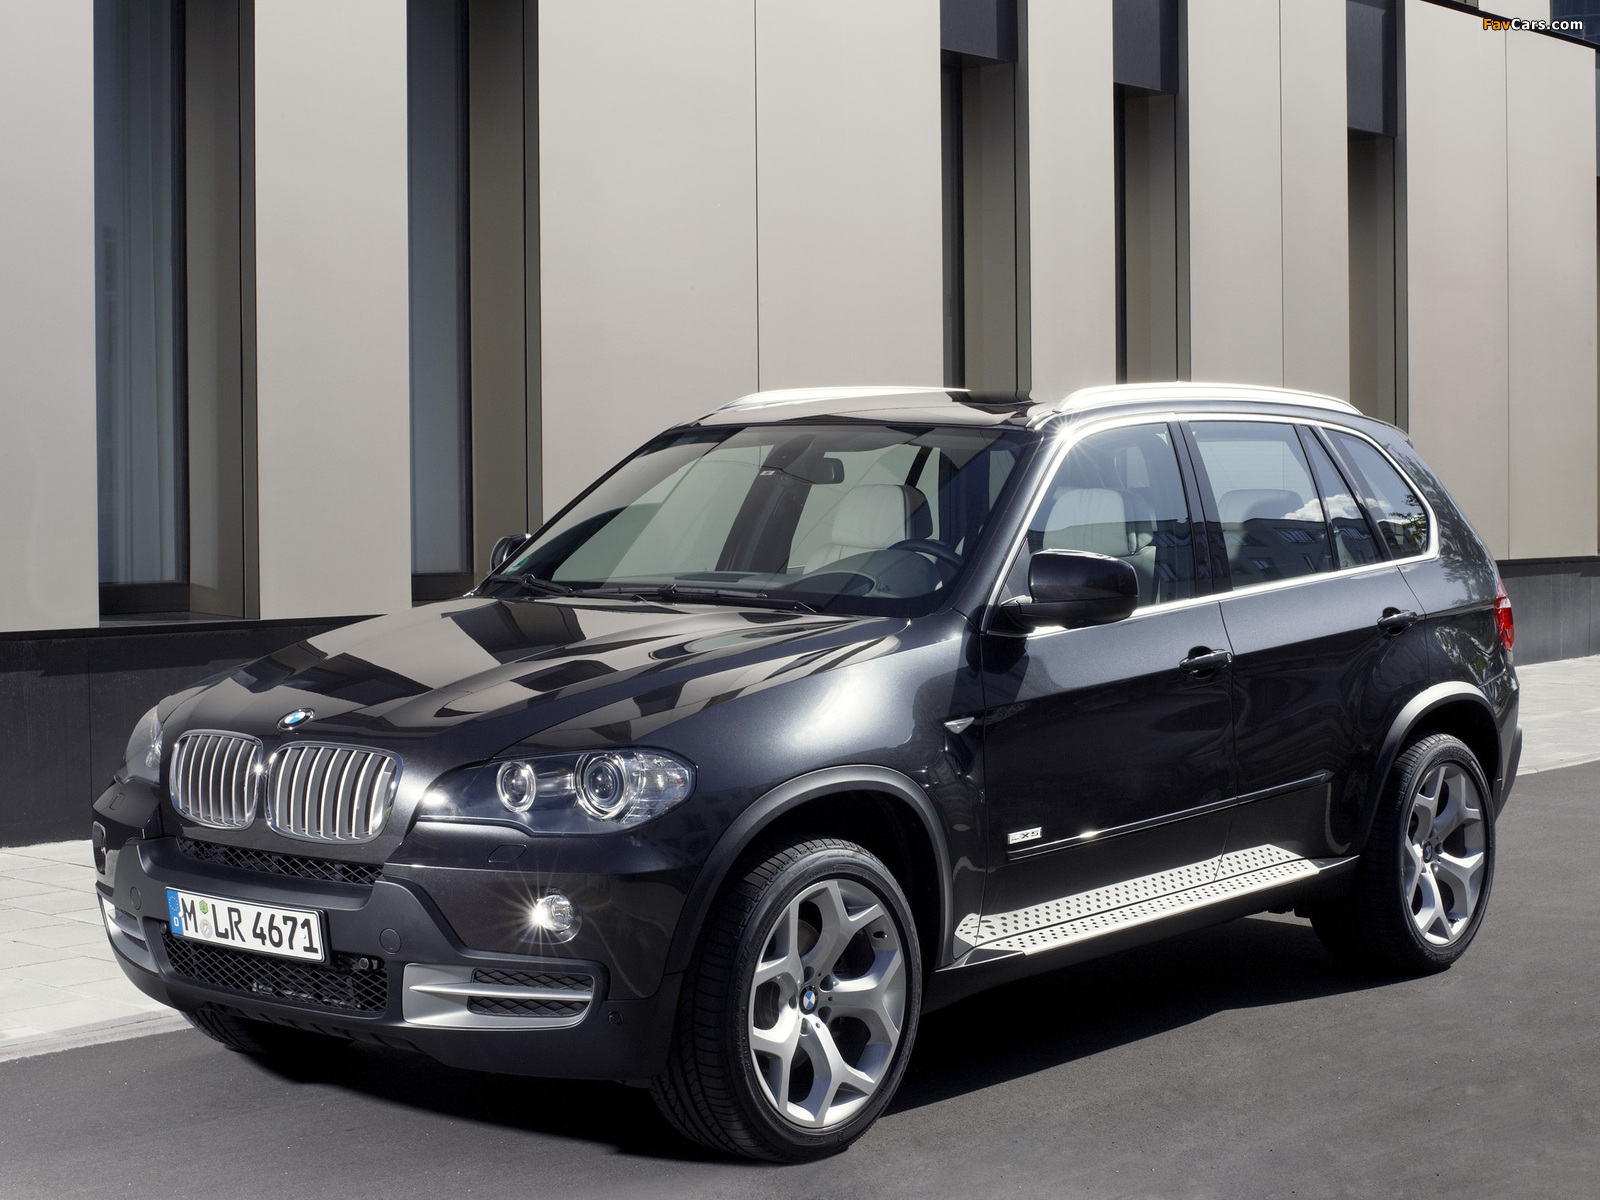 BMW X5 xDrive35d 10 Year Edition (E70) 2009 wallpapers (1600 x 1200)